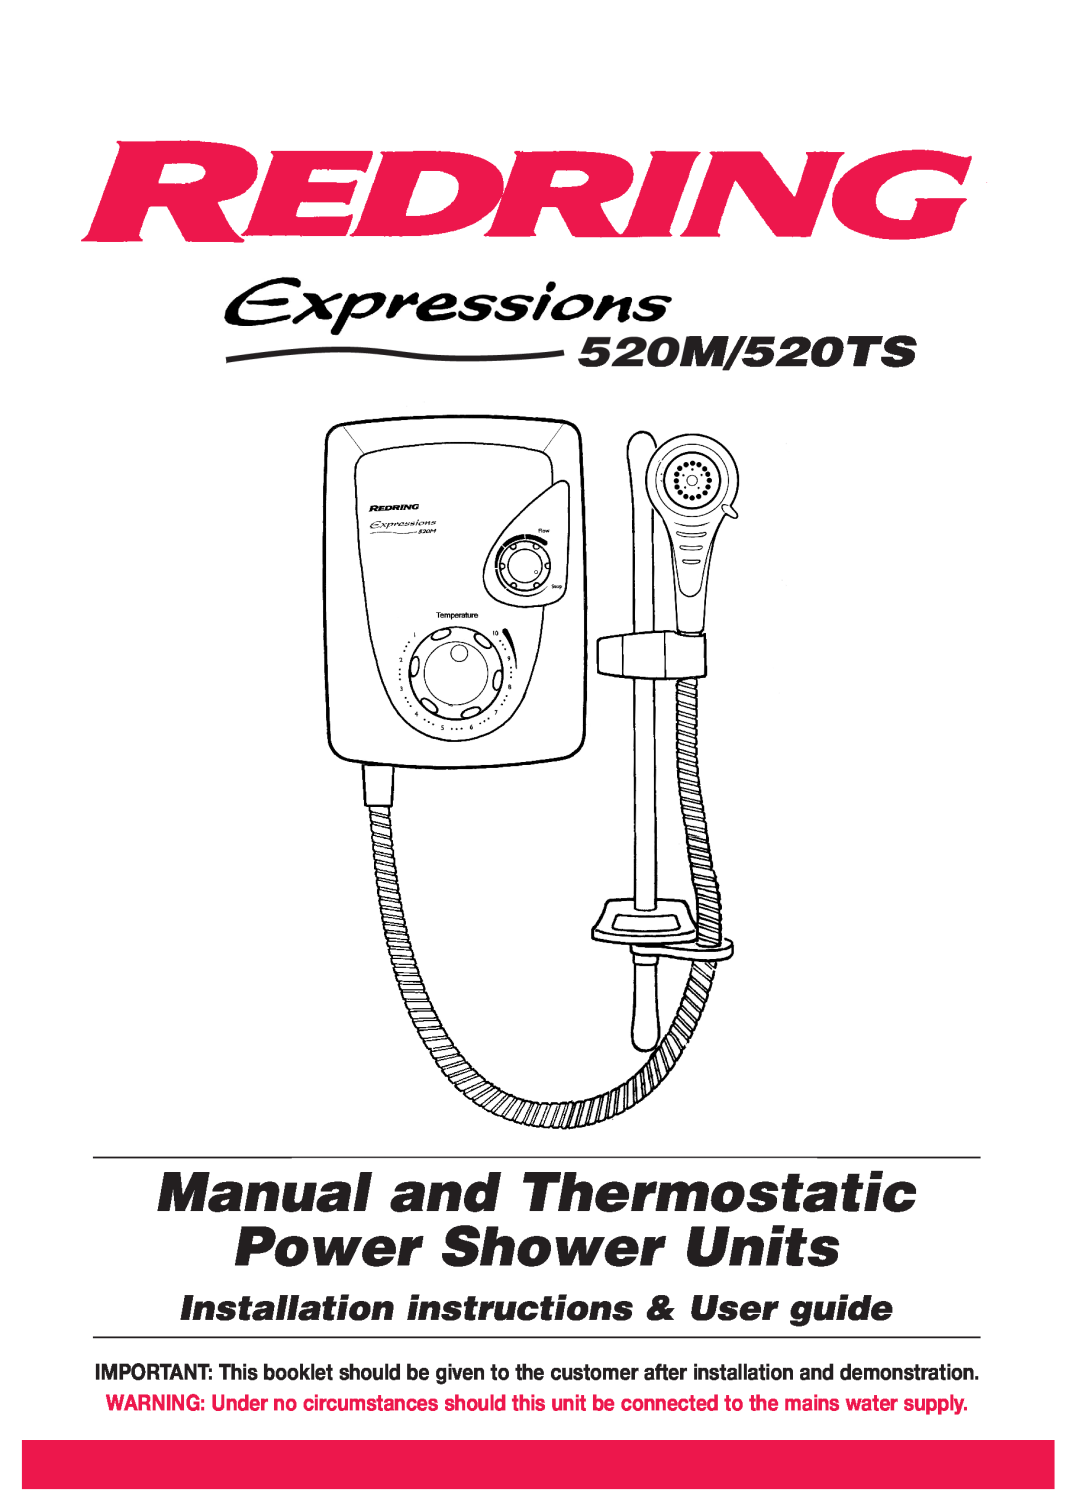 Redring 520M/520TS installation instructions Manual and Thermostatic Power Shower Units 